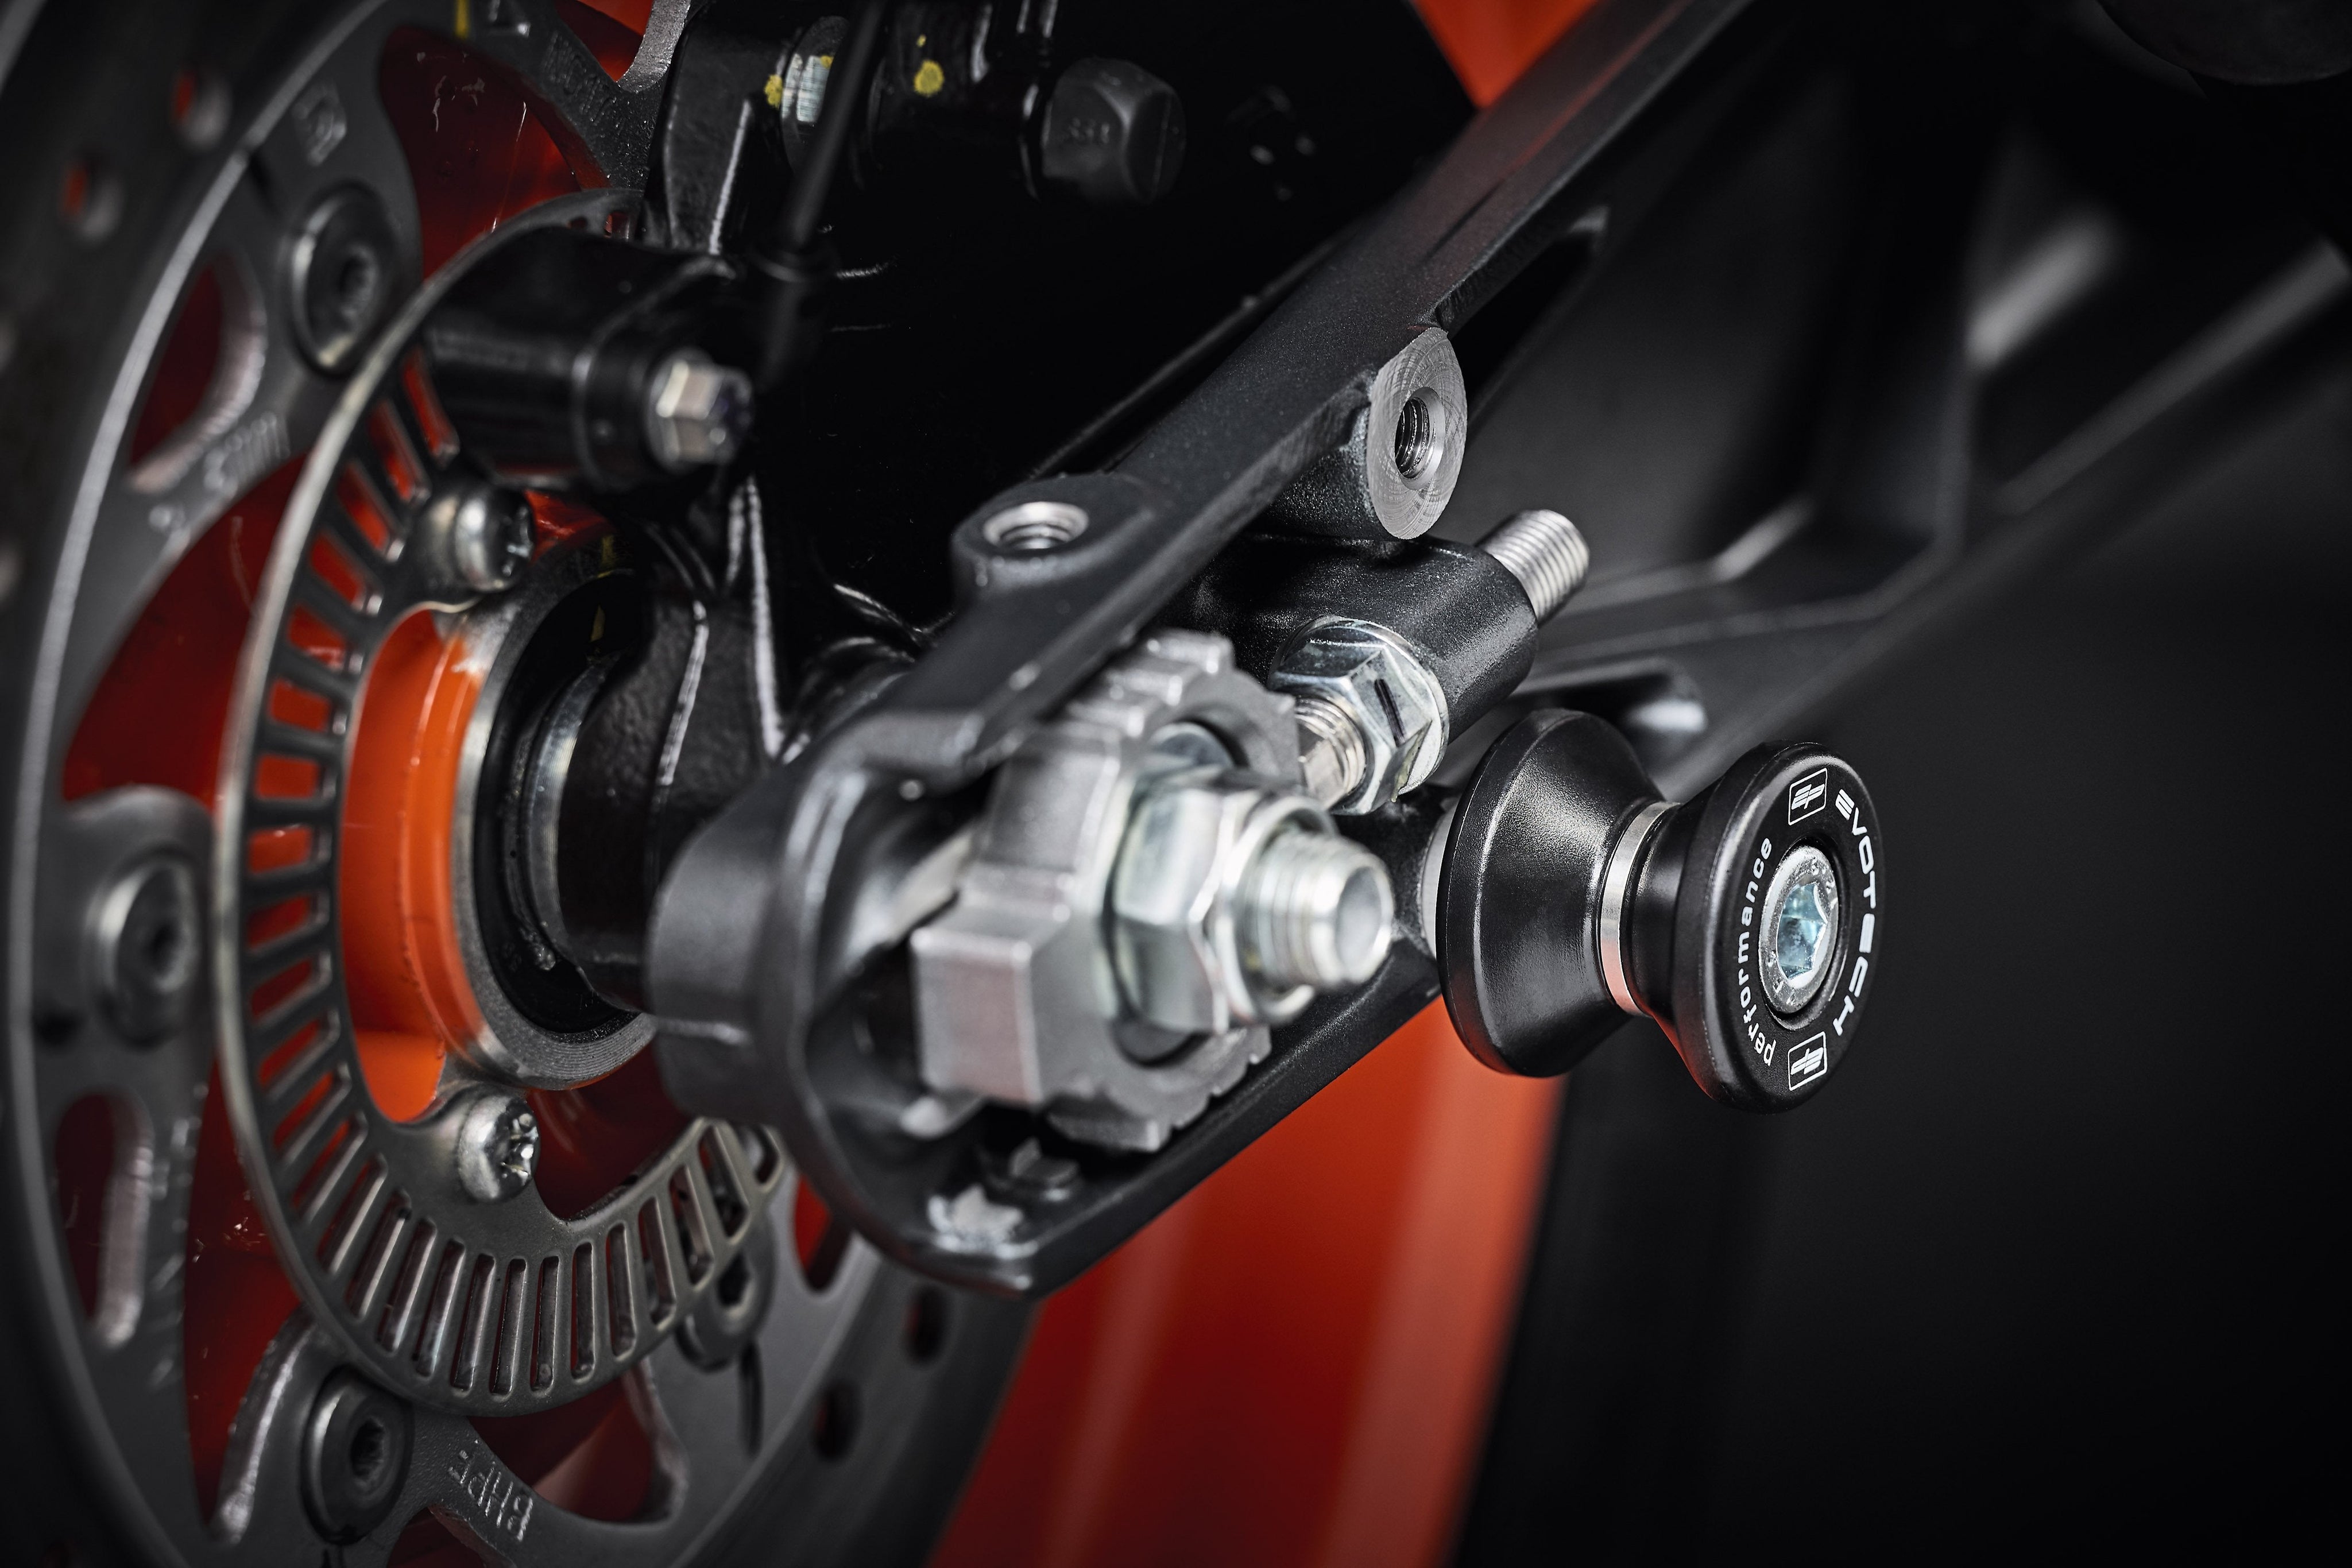 The rear wheel and swingarm of the KTM 1290 Super Adventure R, ready to be raised using the installed EP Paddock Stand Bobbins.